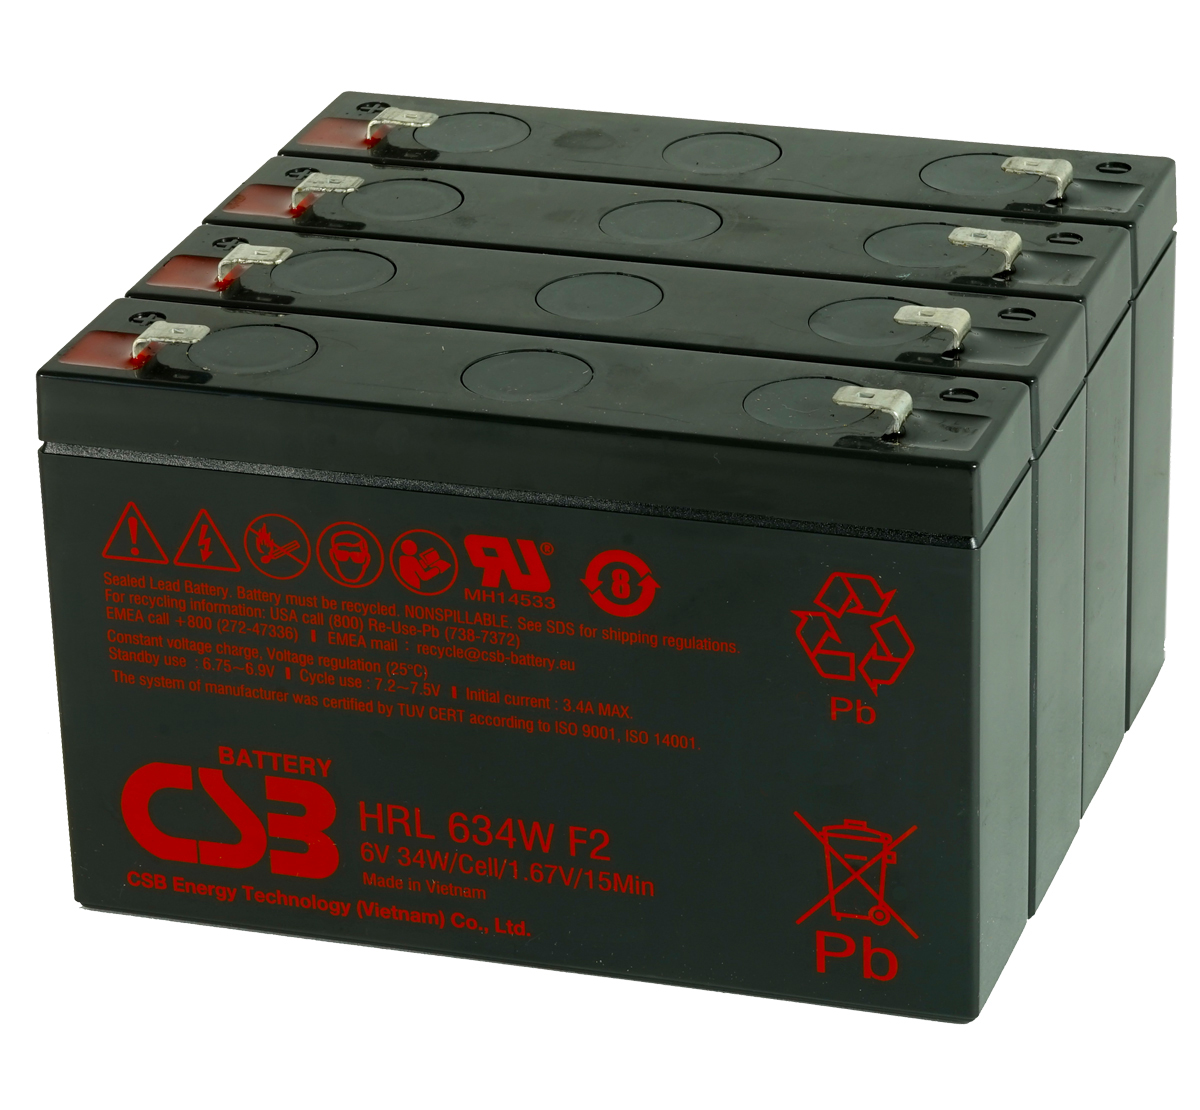 MDS1006 UPS Battery Kit for MGE AB1006